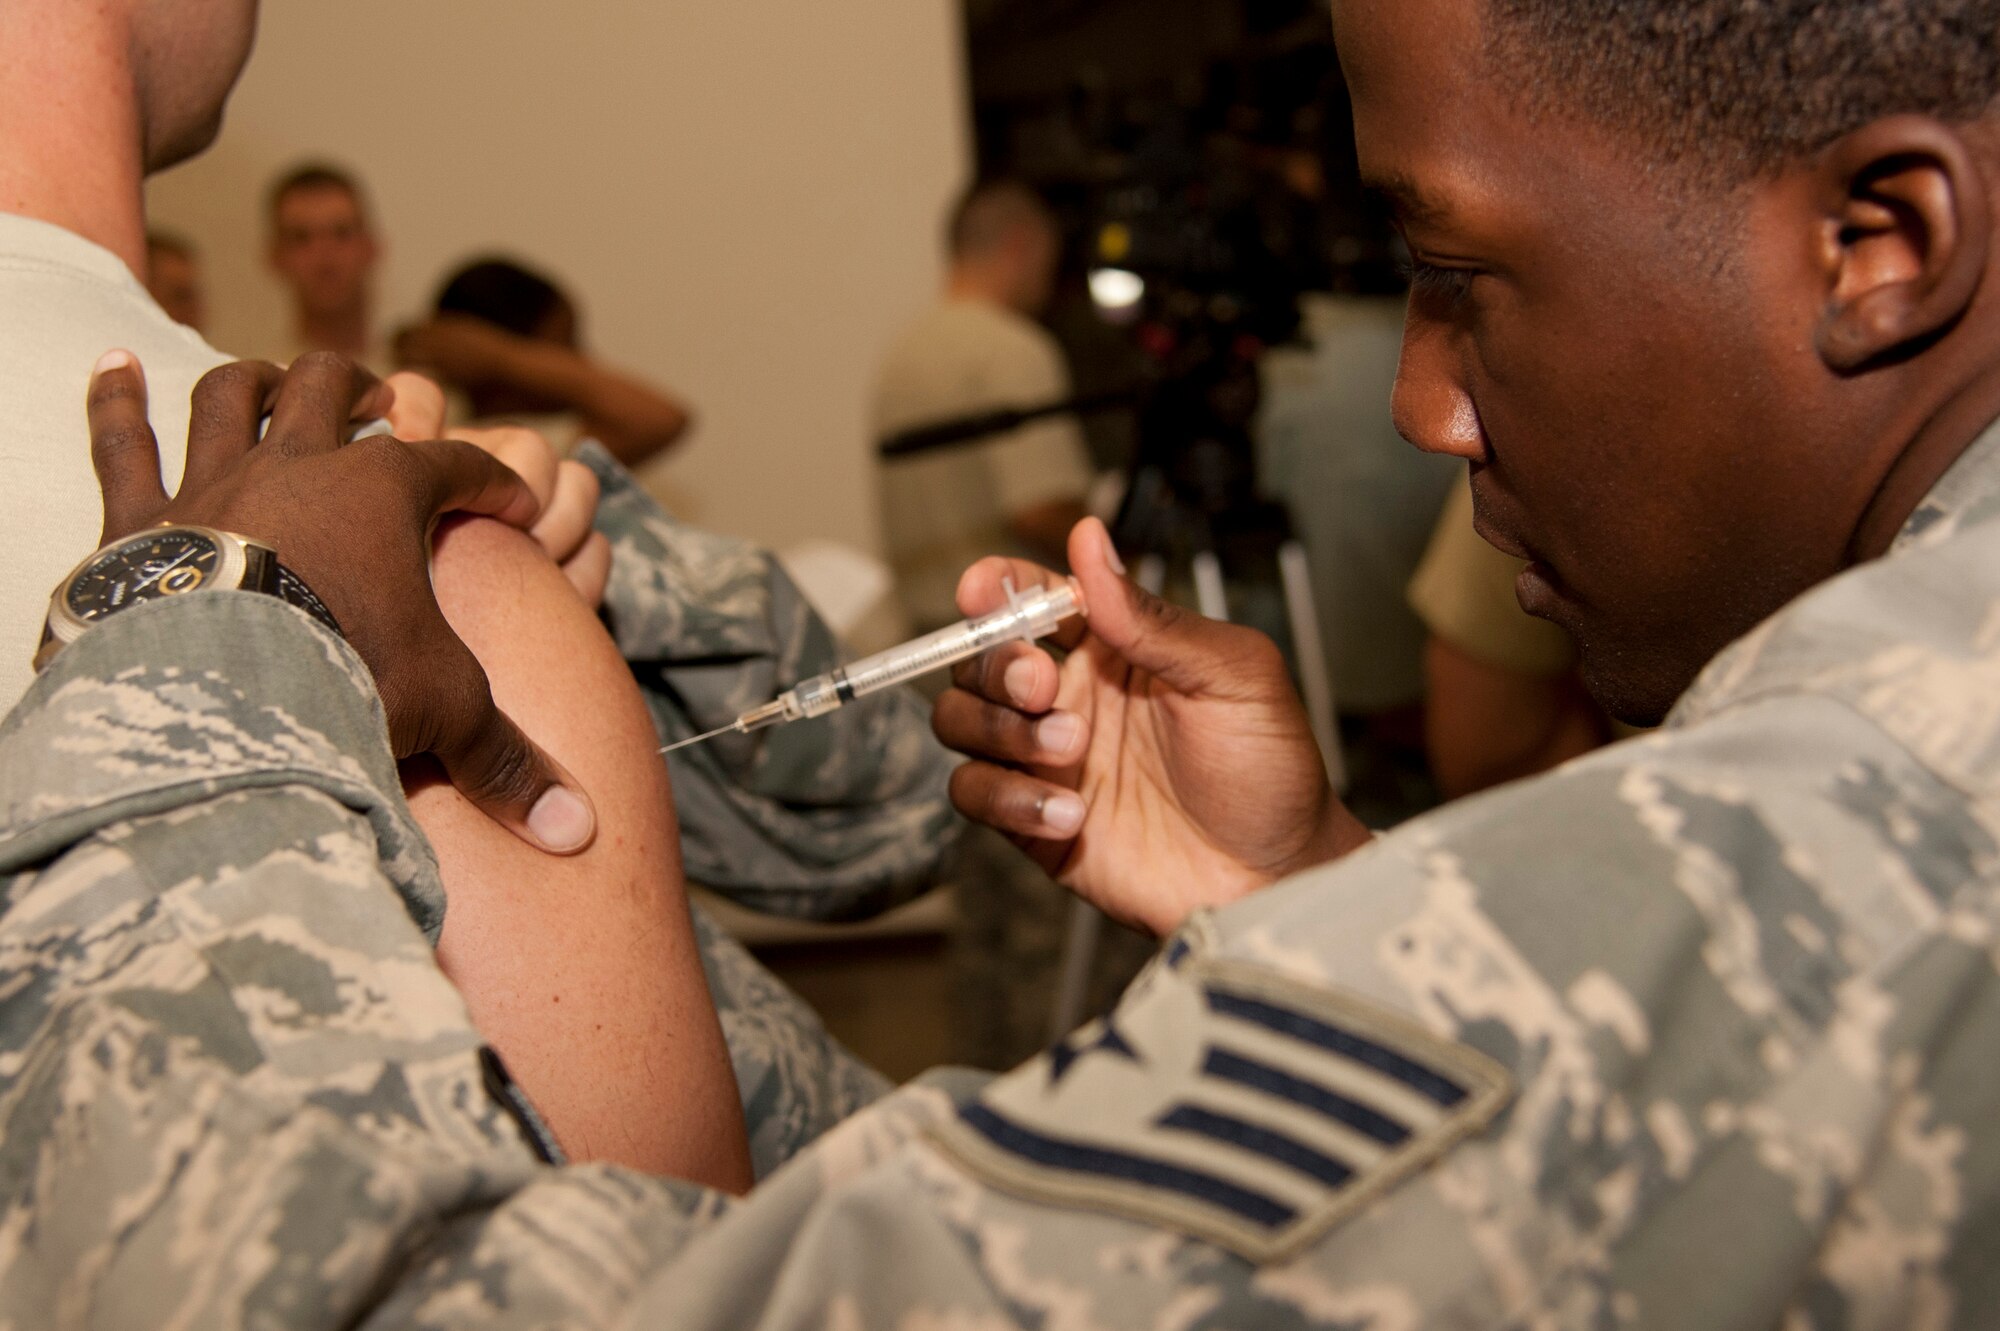 VANDENBERG AIR FORCE BASE, Calif. – Staff Sgt. Zavier Grier, 30th Medical Operations Squadron aerospace medical technician, administers the flu vaccine at the Point of Distribution (POD) in the Installation Deployment Readiness Cell here Thursday, Oct. 18, 2012.  Active duty Airmen reported to the POD in an exercise simulating mass immunization against anthrax, and base authorities used the opportunity to distribute this year’s real world influenza vaccine.  The POD distributed Skittles candy representing the anthrax prophylaxis to over 1,900 Airmen and then vaccinated over 1,500 Airmen for influenza, raising the wing’s flu vaccination rate to over 90%.  The purpose of the exercise was toevaluate the wing’s response to a public health emergency by testing the 30th Medical Group’s ability to stand up a POD and rapidly distribute countermeasures. Mass inoculation of this scale was a first for Vandenberg Air Force Base. (U.S. Air Force photo/Senior Airman Lael Huss)